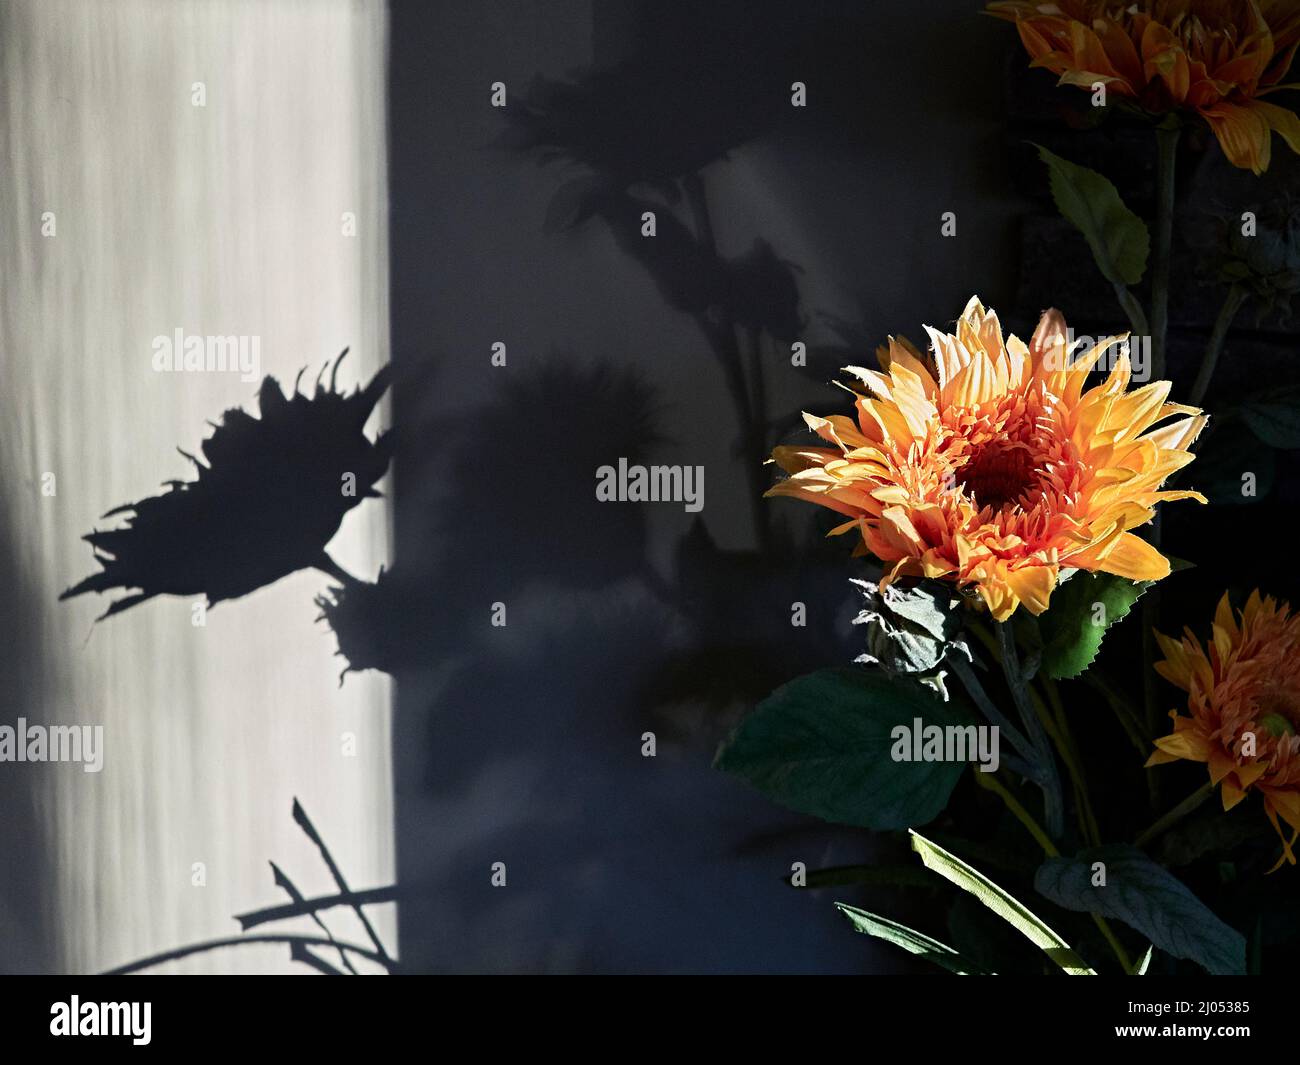 Bright yellow silk flower arrangement with a contrasting silhouette of the same flower on the wall. Stock Photo